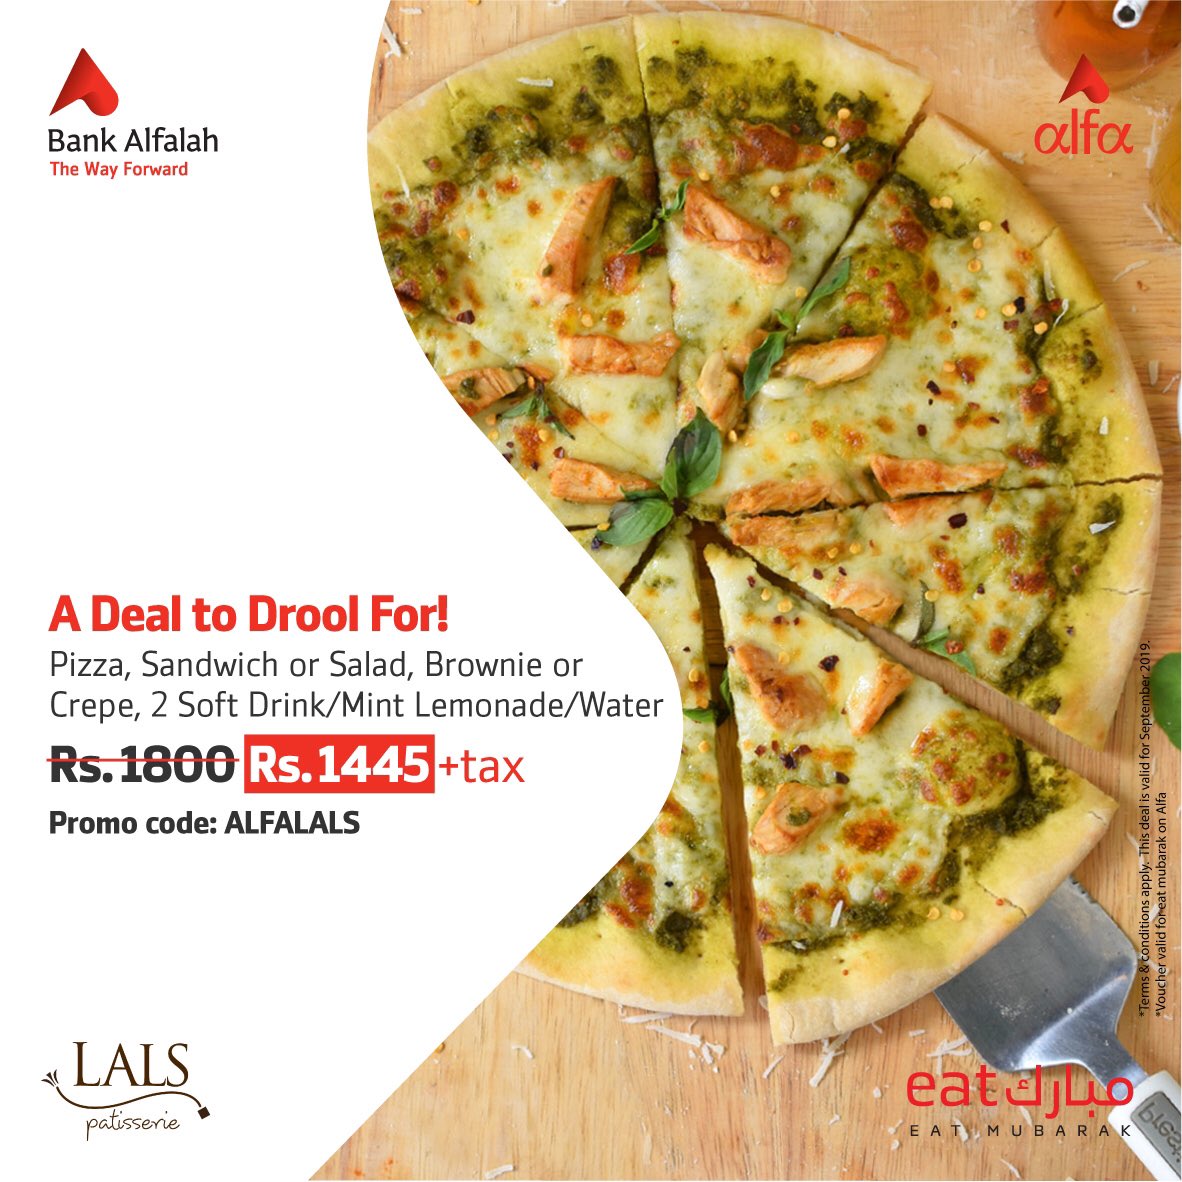 Bank Alfalah A Twitter Drool Over A Meal From Lals Order A Pizza Sandwich Or Salad Brownie Or Crepe 2 Drinks Of Your Choice For Rs 1445 Plus Tax Only When Your